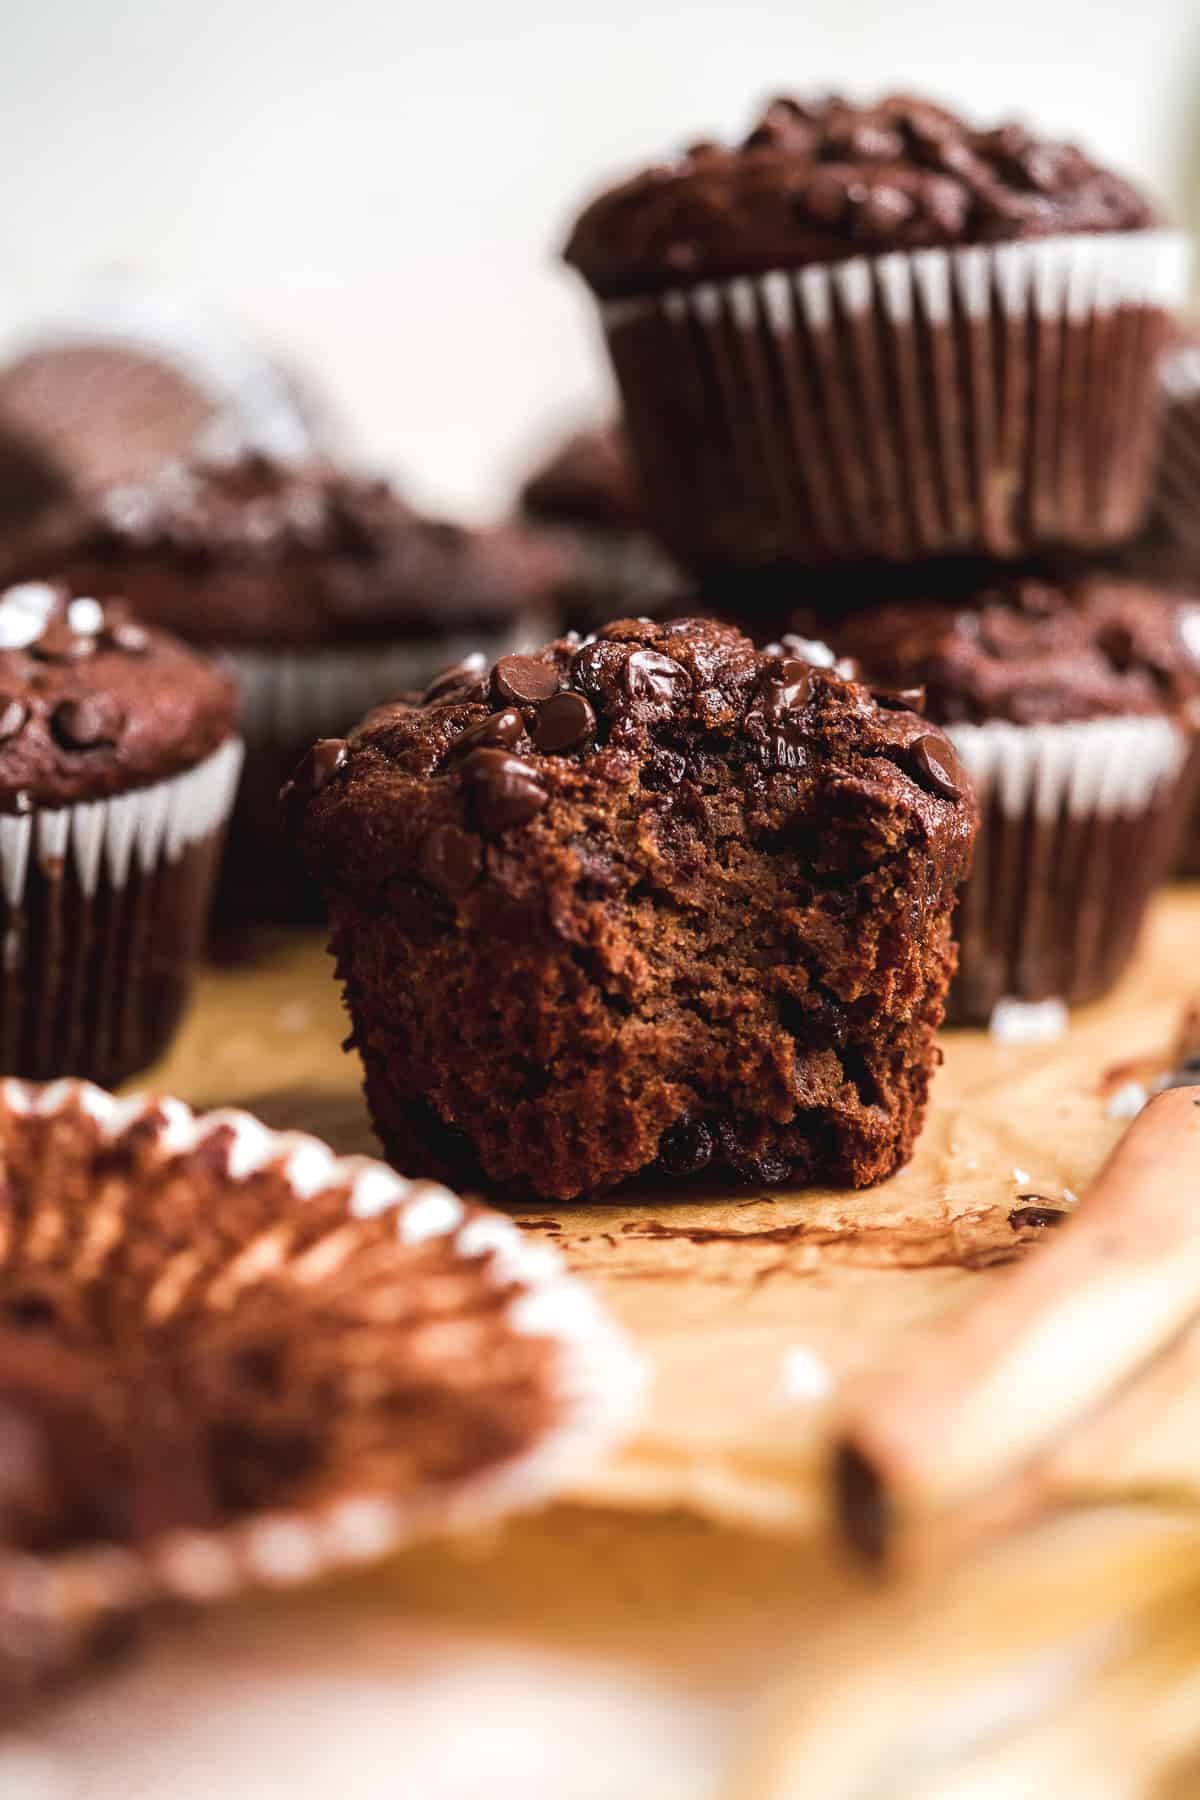 Up close view of chocolate muffin with a bite taken out of it on brown parchment paper.